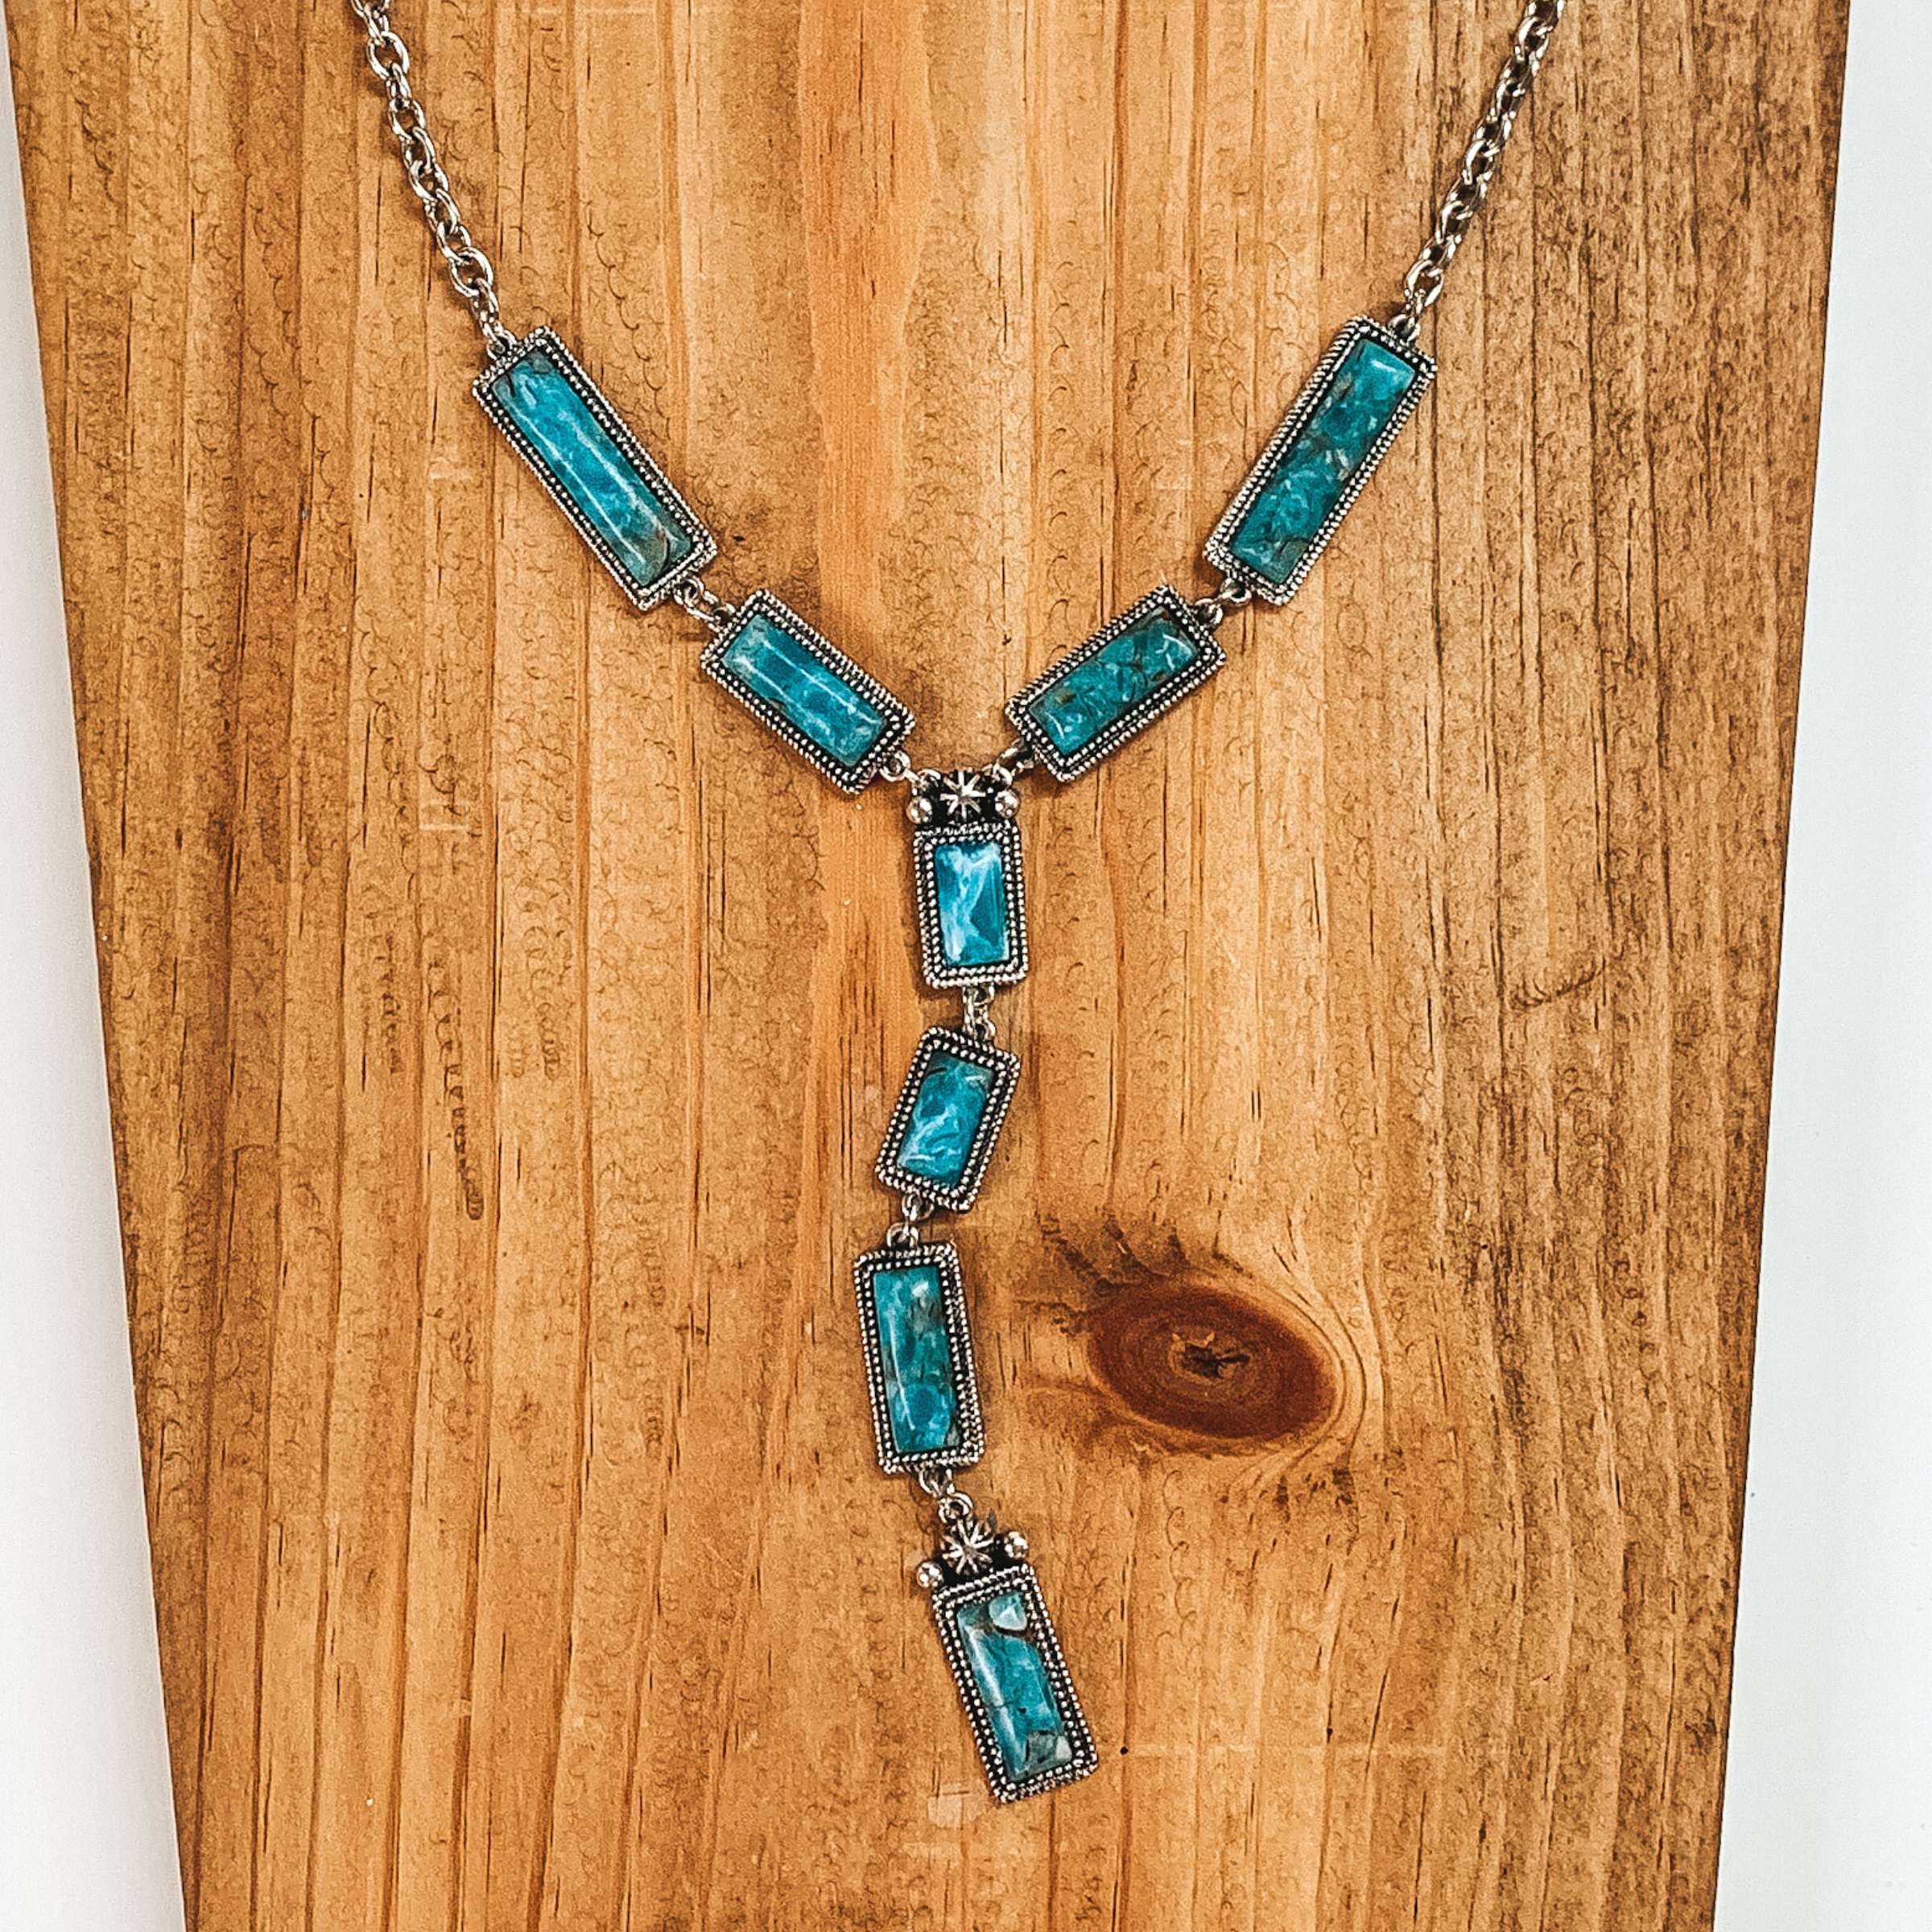 Silver Tone Lariat Necklace with Faux Turquoise Stones - Giddy Up Glamour Boutique